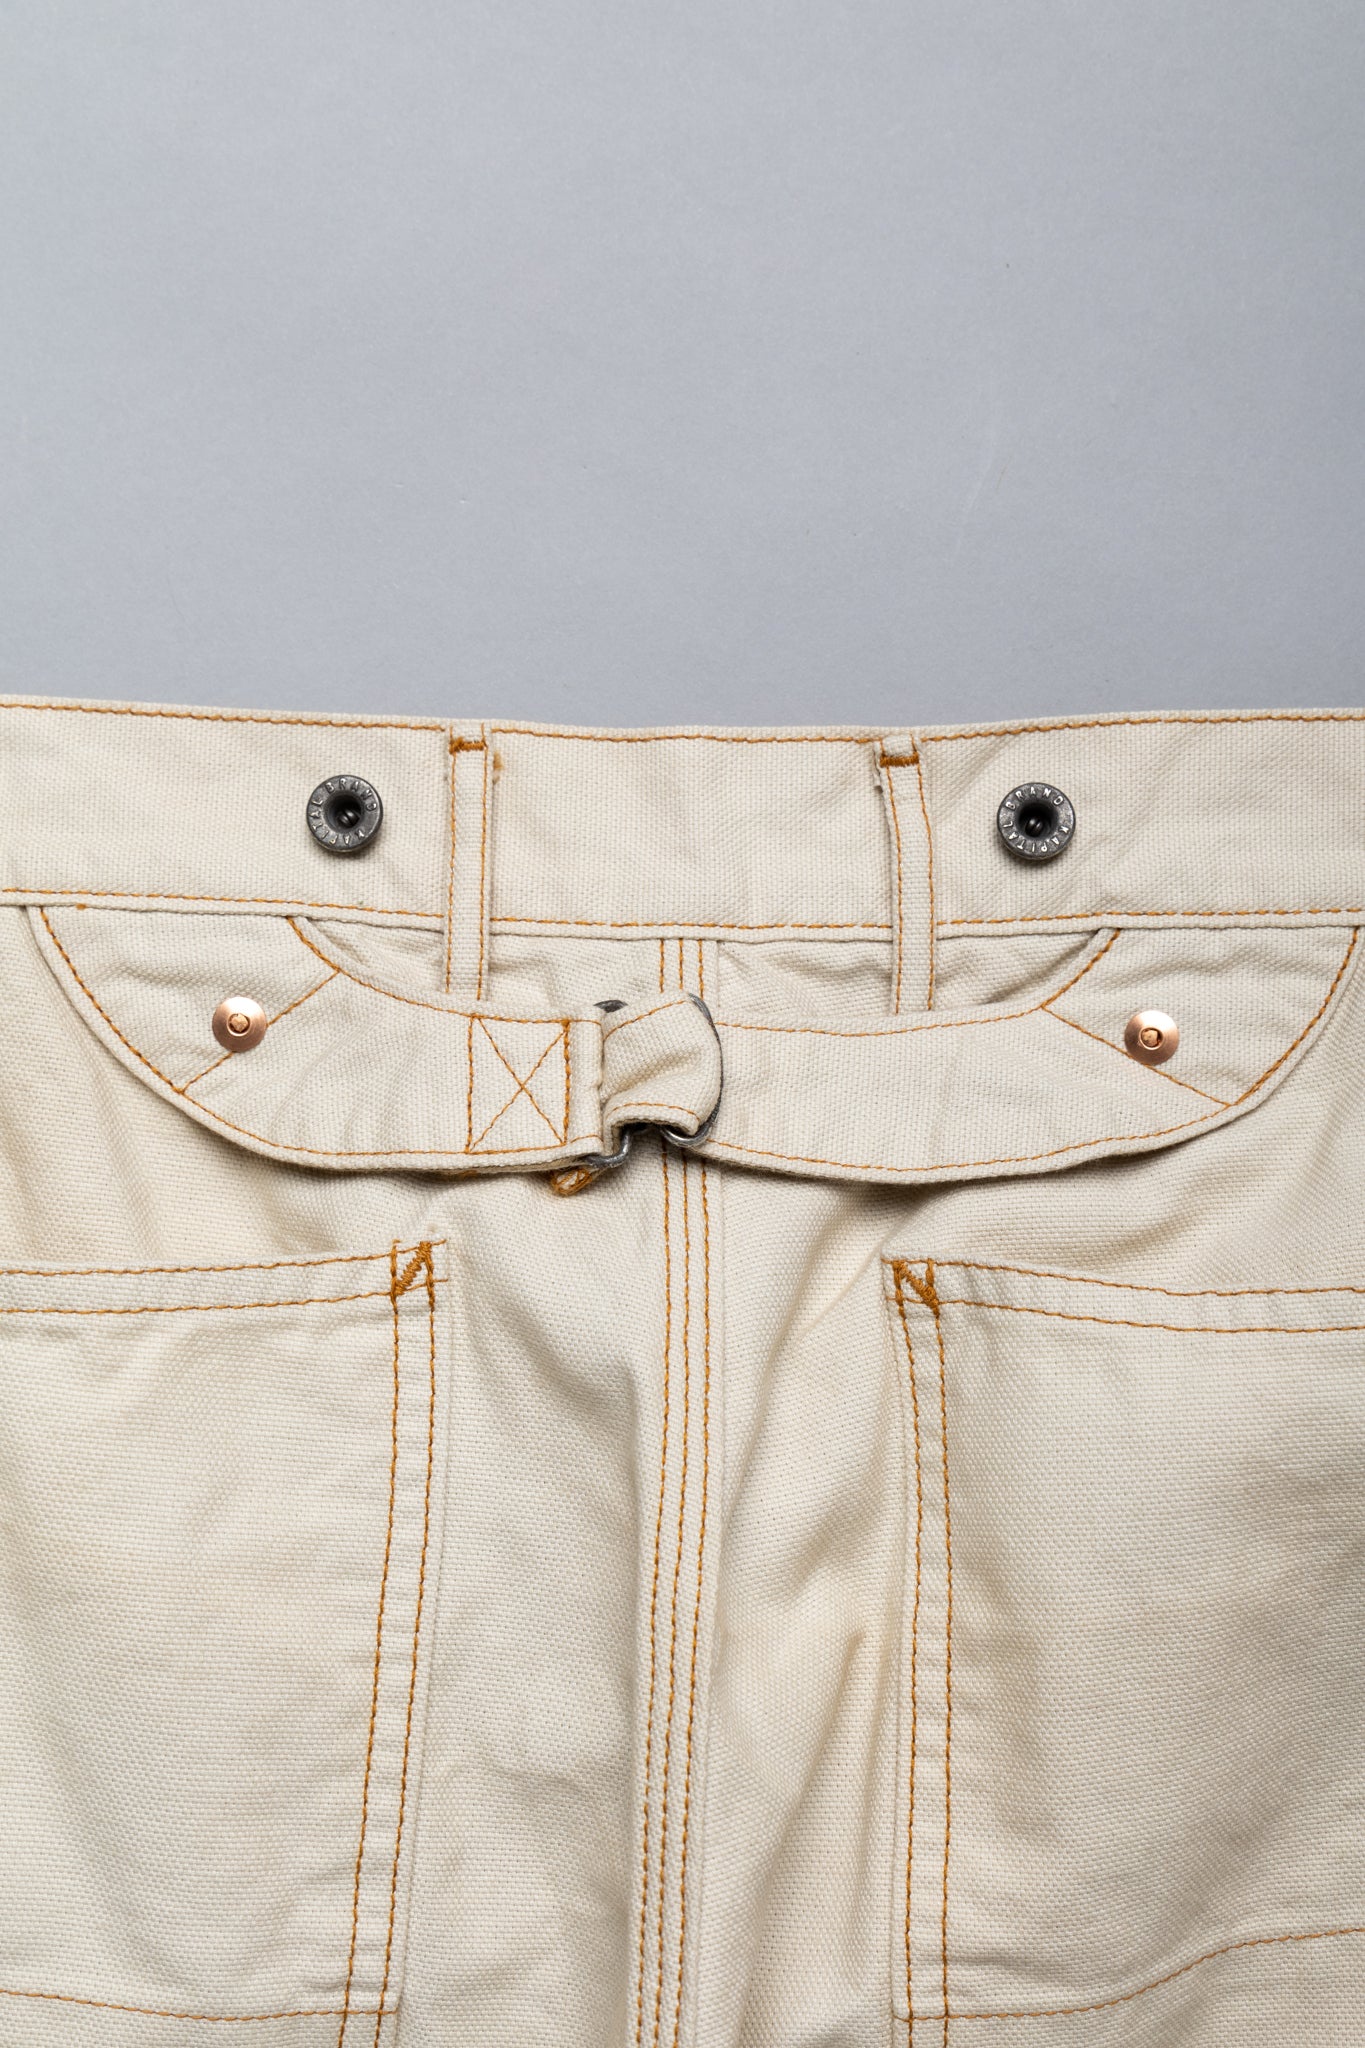 Made by Kapital are lumber pants inspired by overalls. Intricate stitching and intentional distressed details throughout front on pants. Loose fit. 100% Cotton. Made in Japan 